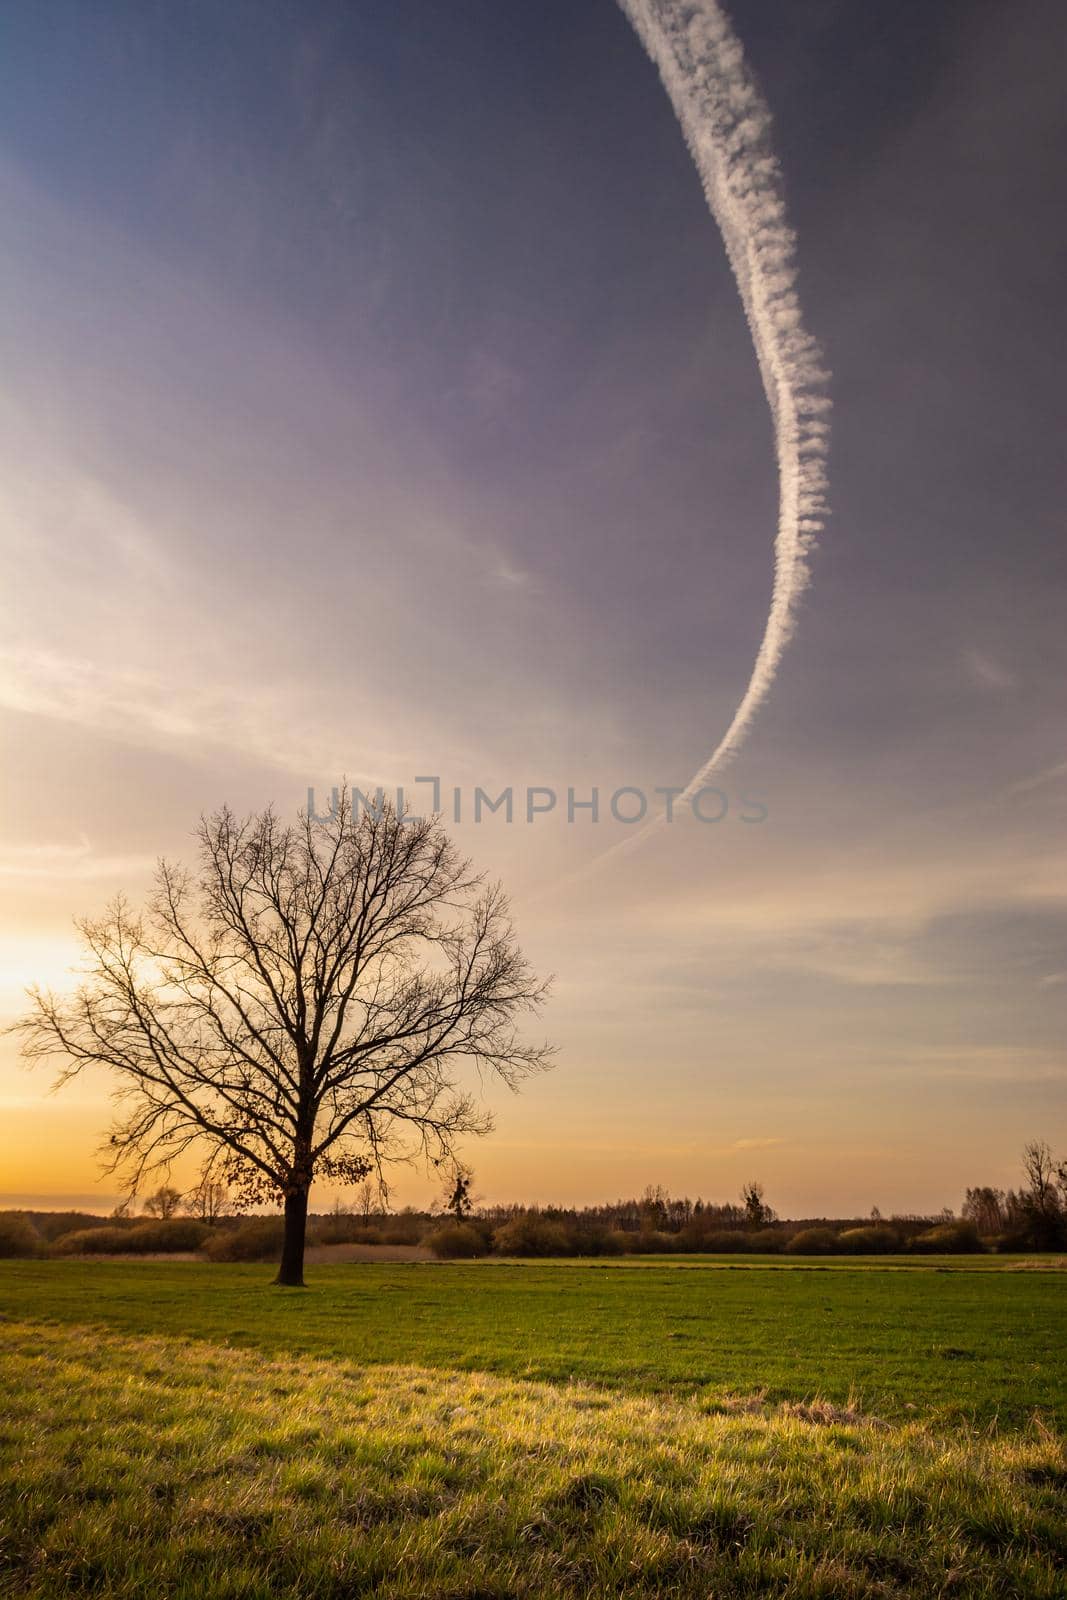 A tree in the meadow and a streak in the sky, rural view